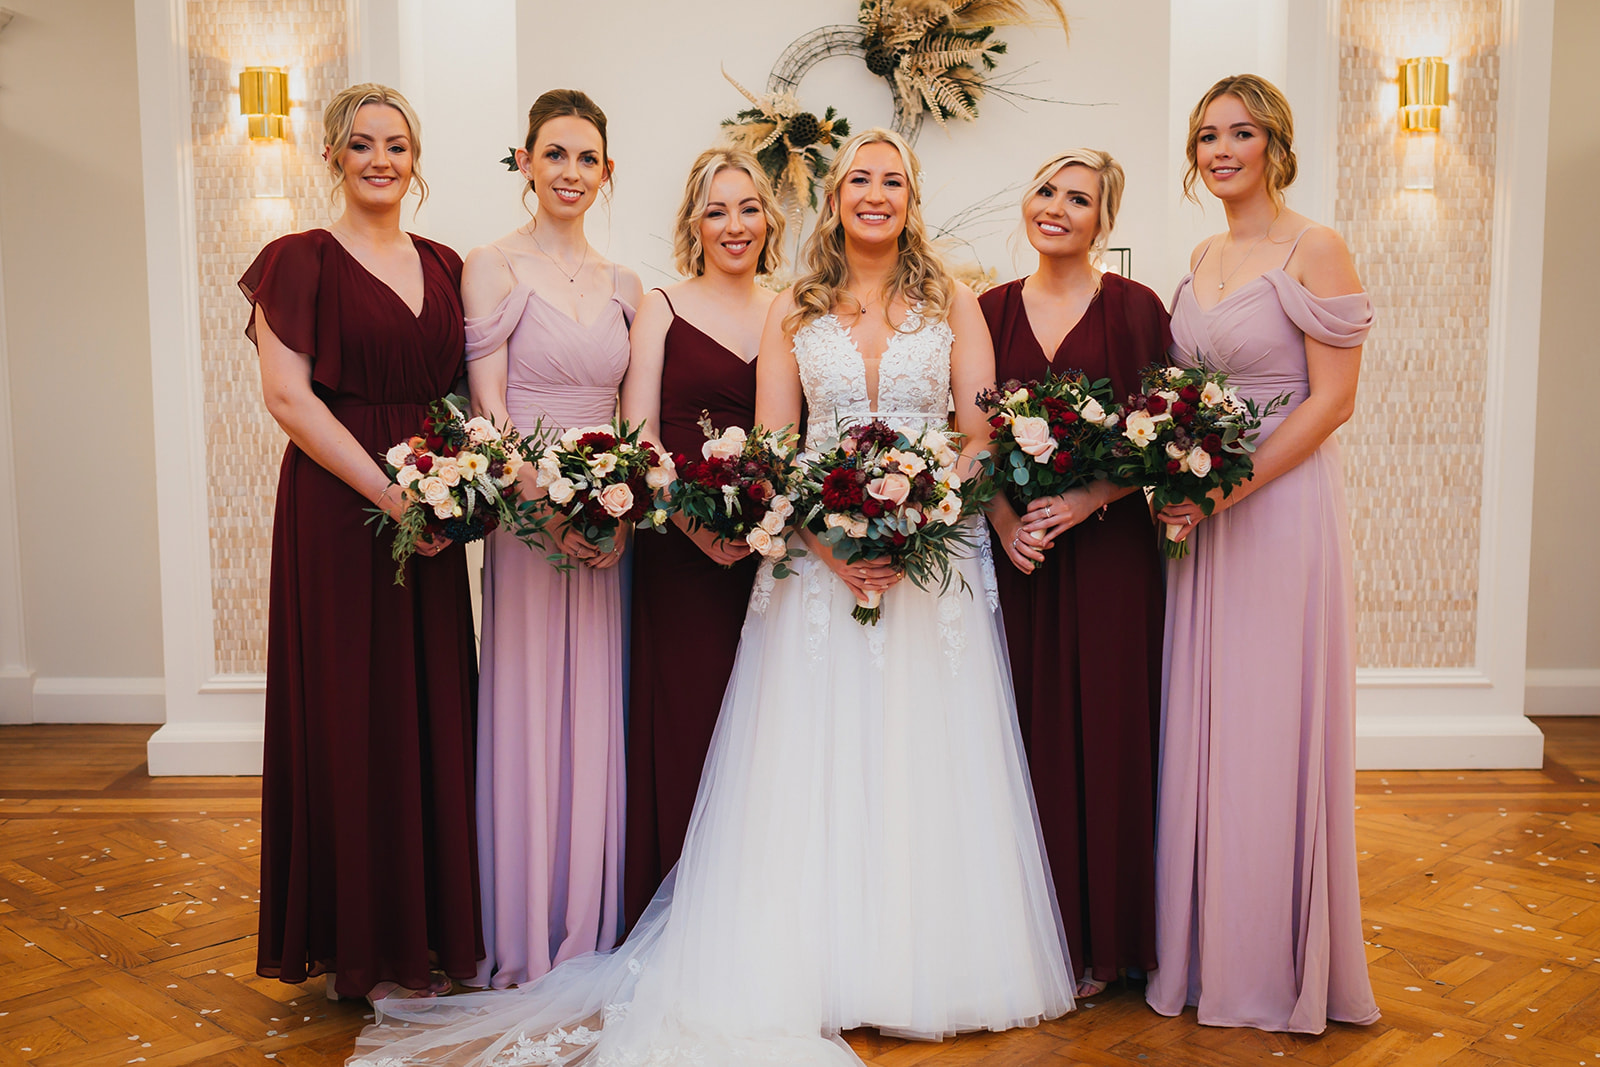 a group photograph of the bride and her bridesmaids